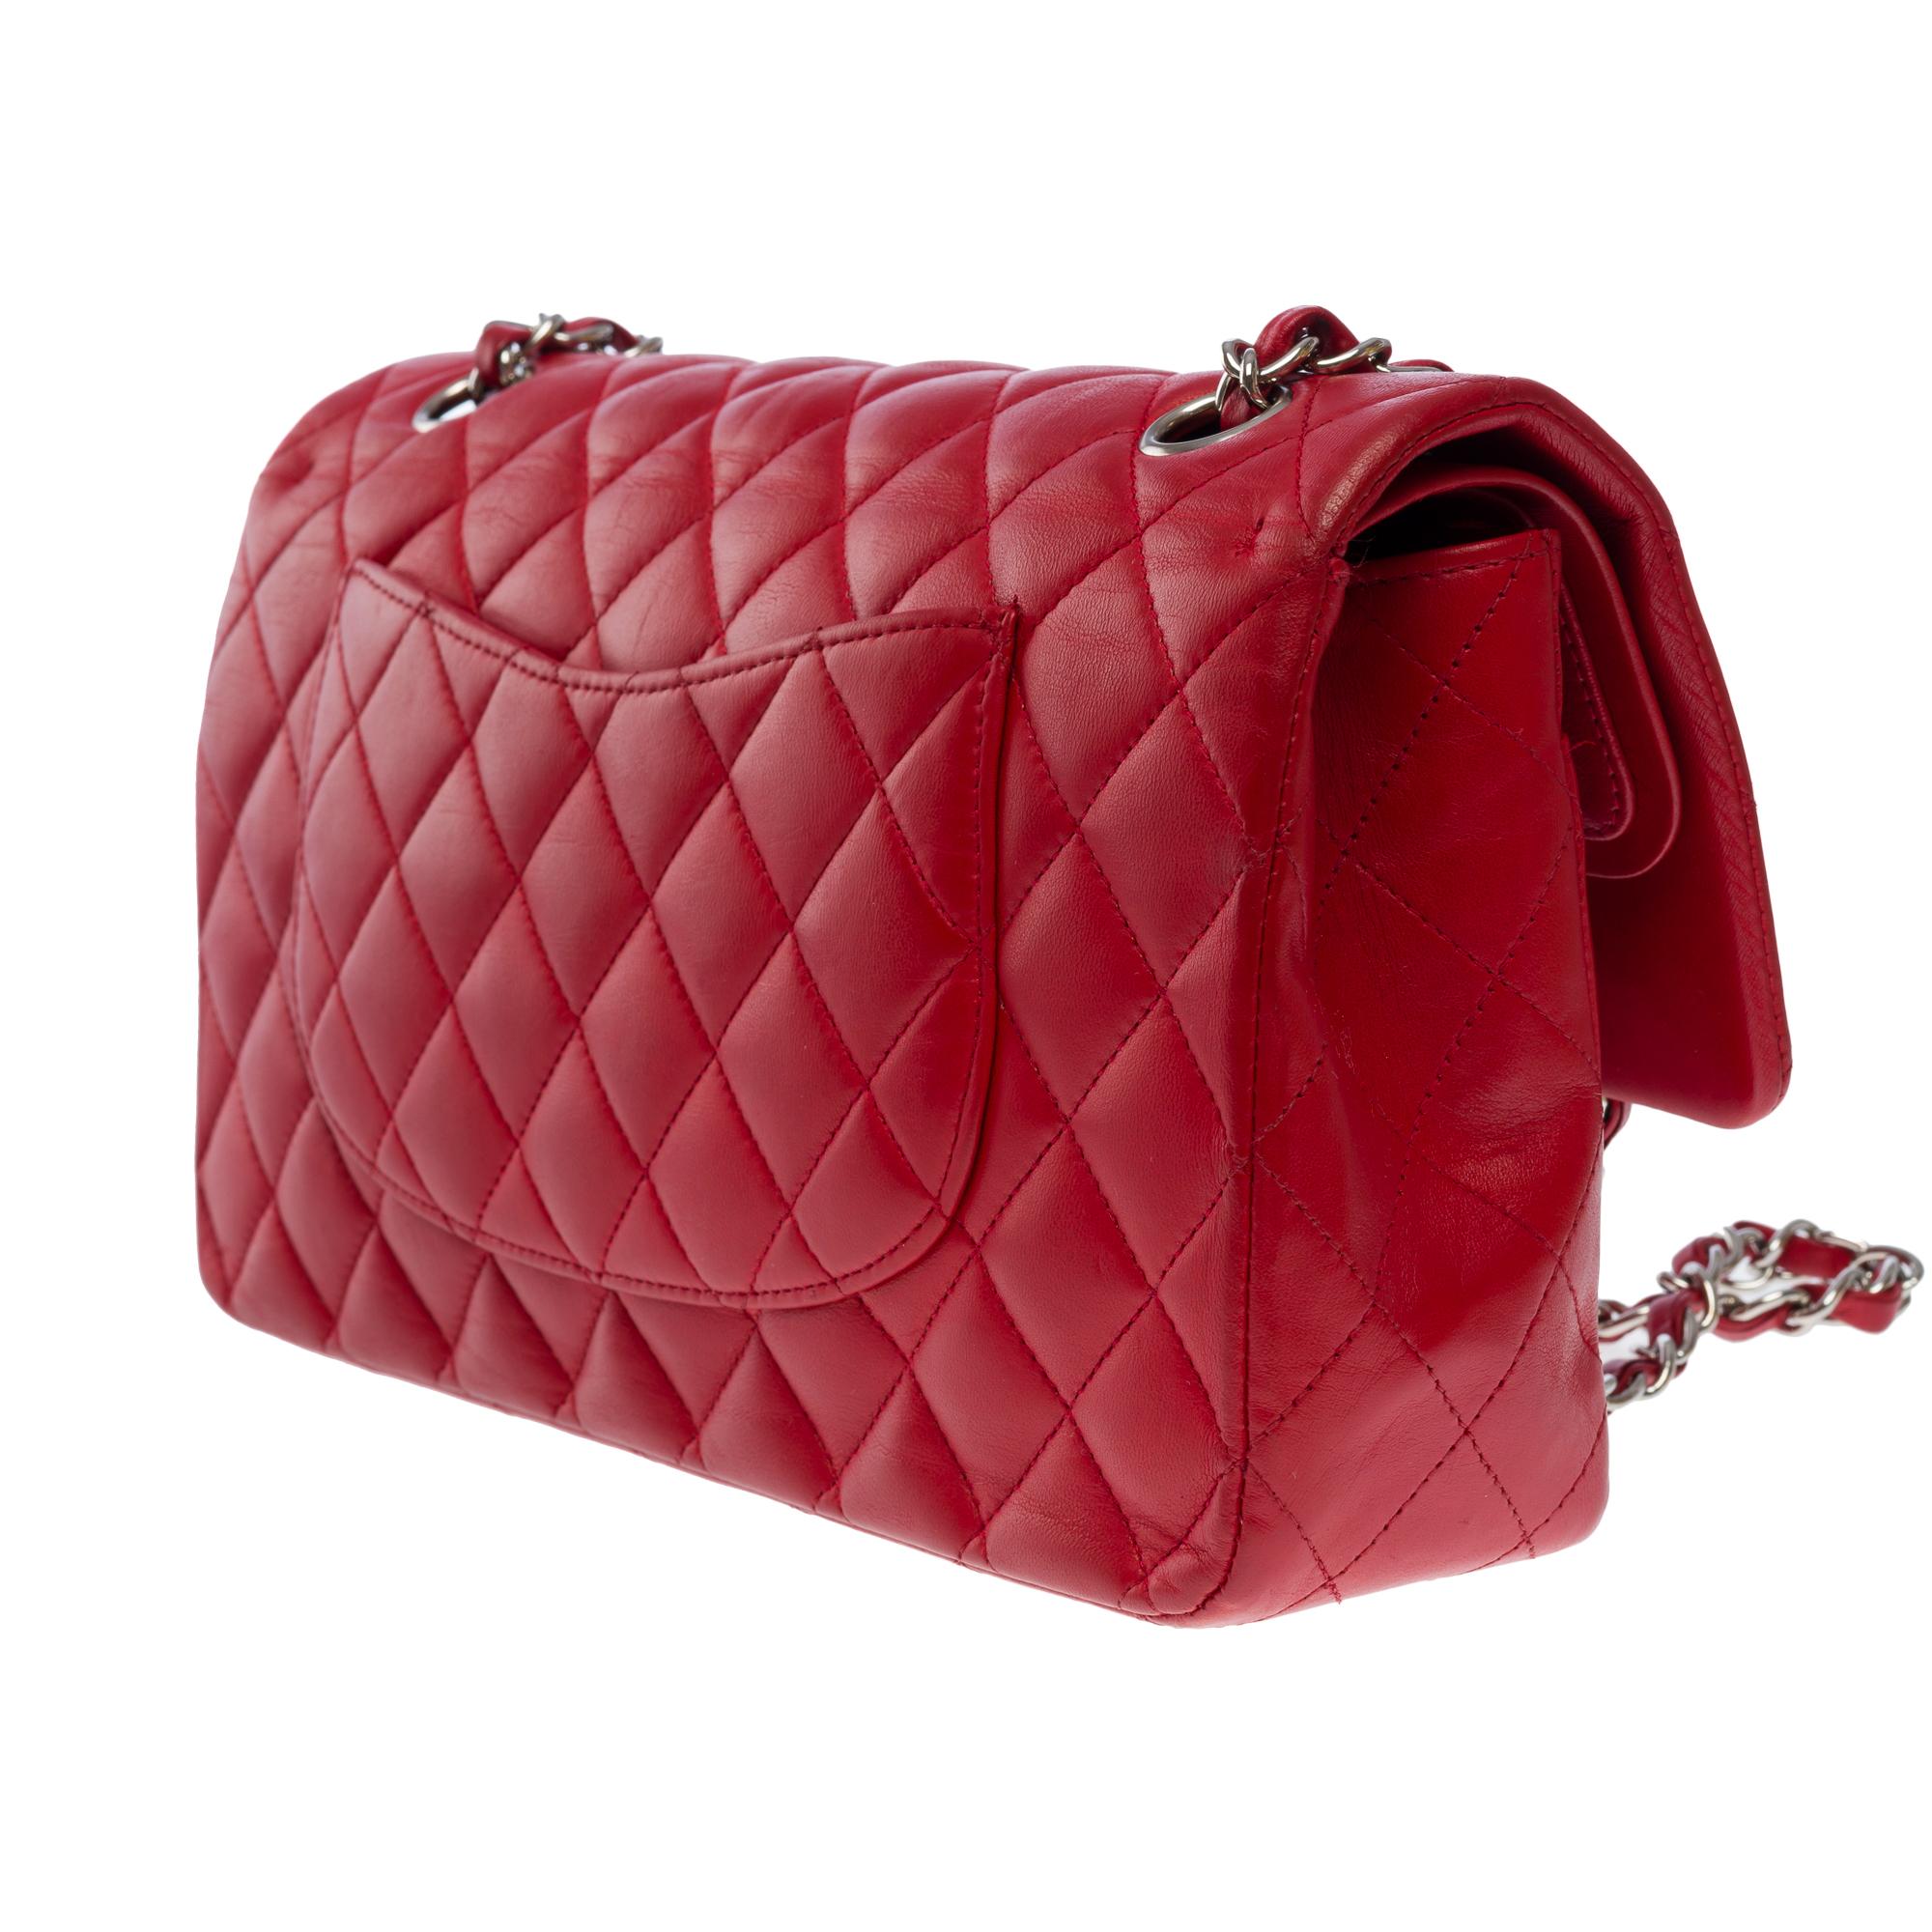 Chanel Timeless Medium double flap shoulder bag in Red lambskin leather, SHW For Sale 1